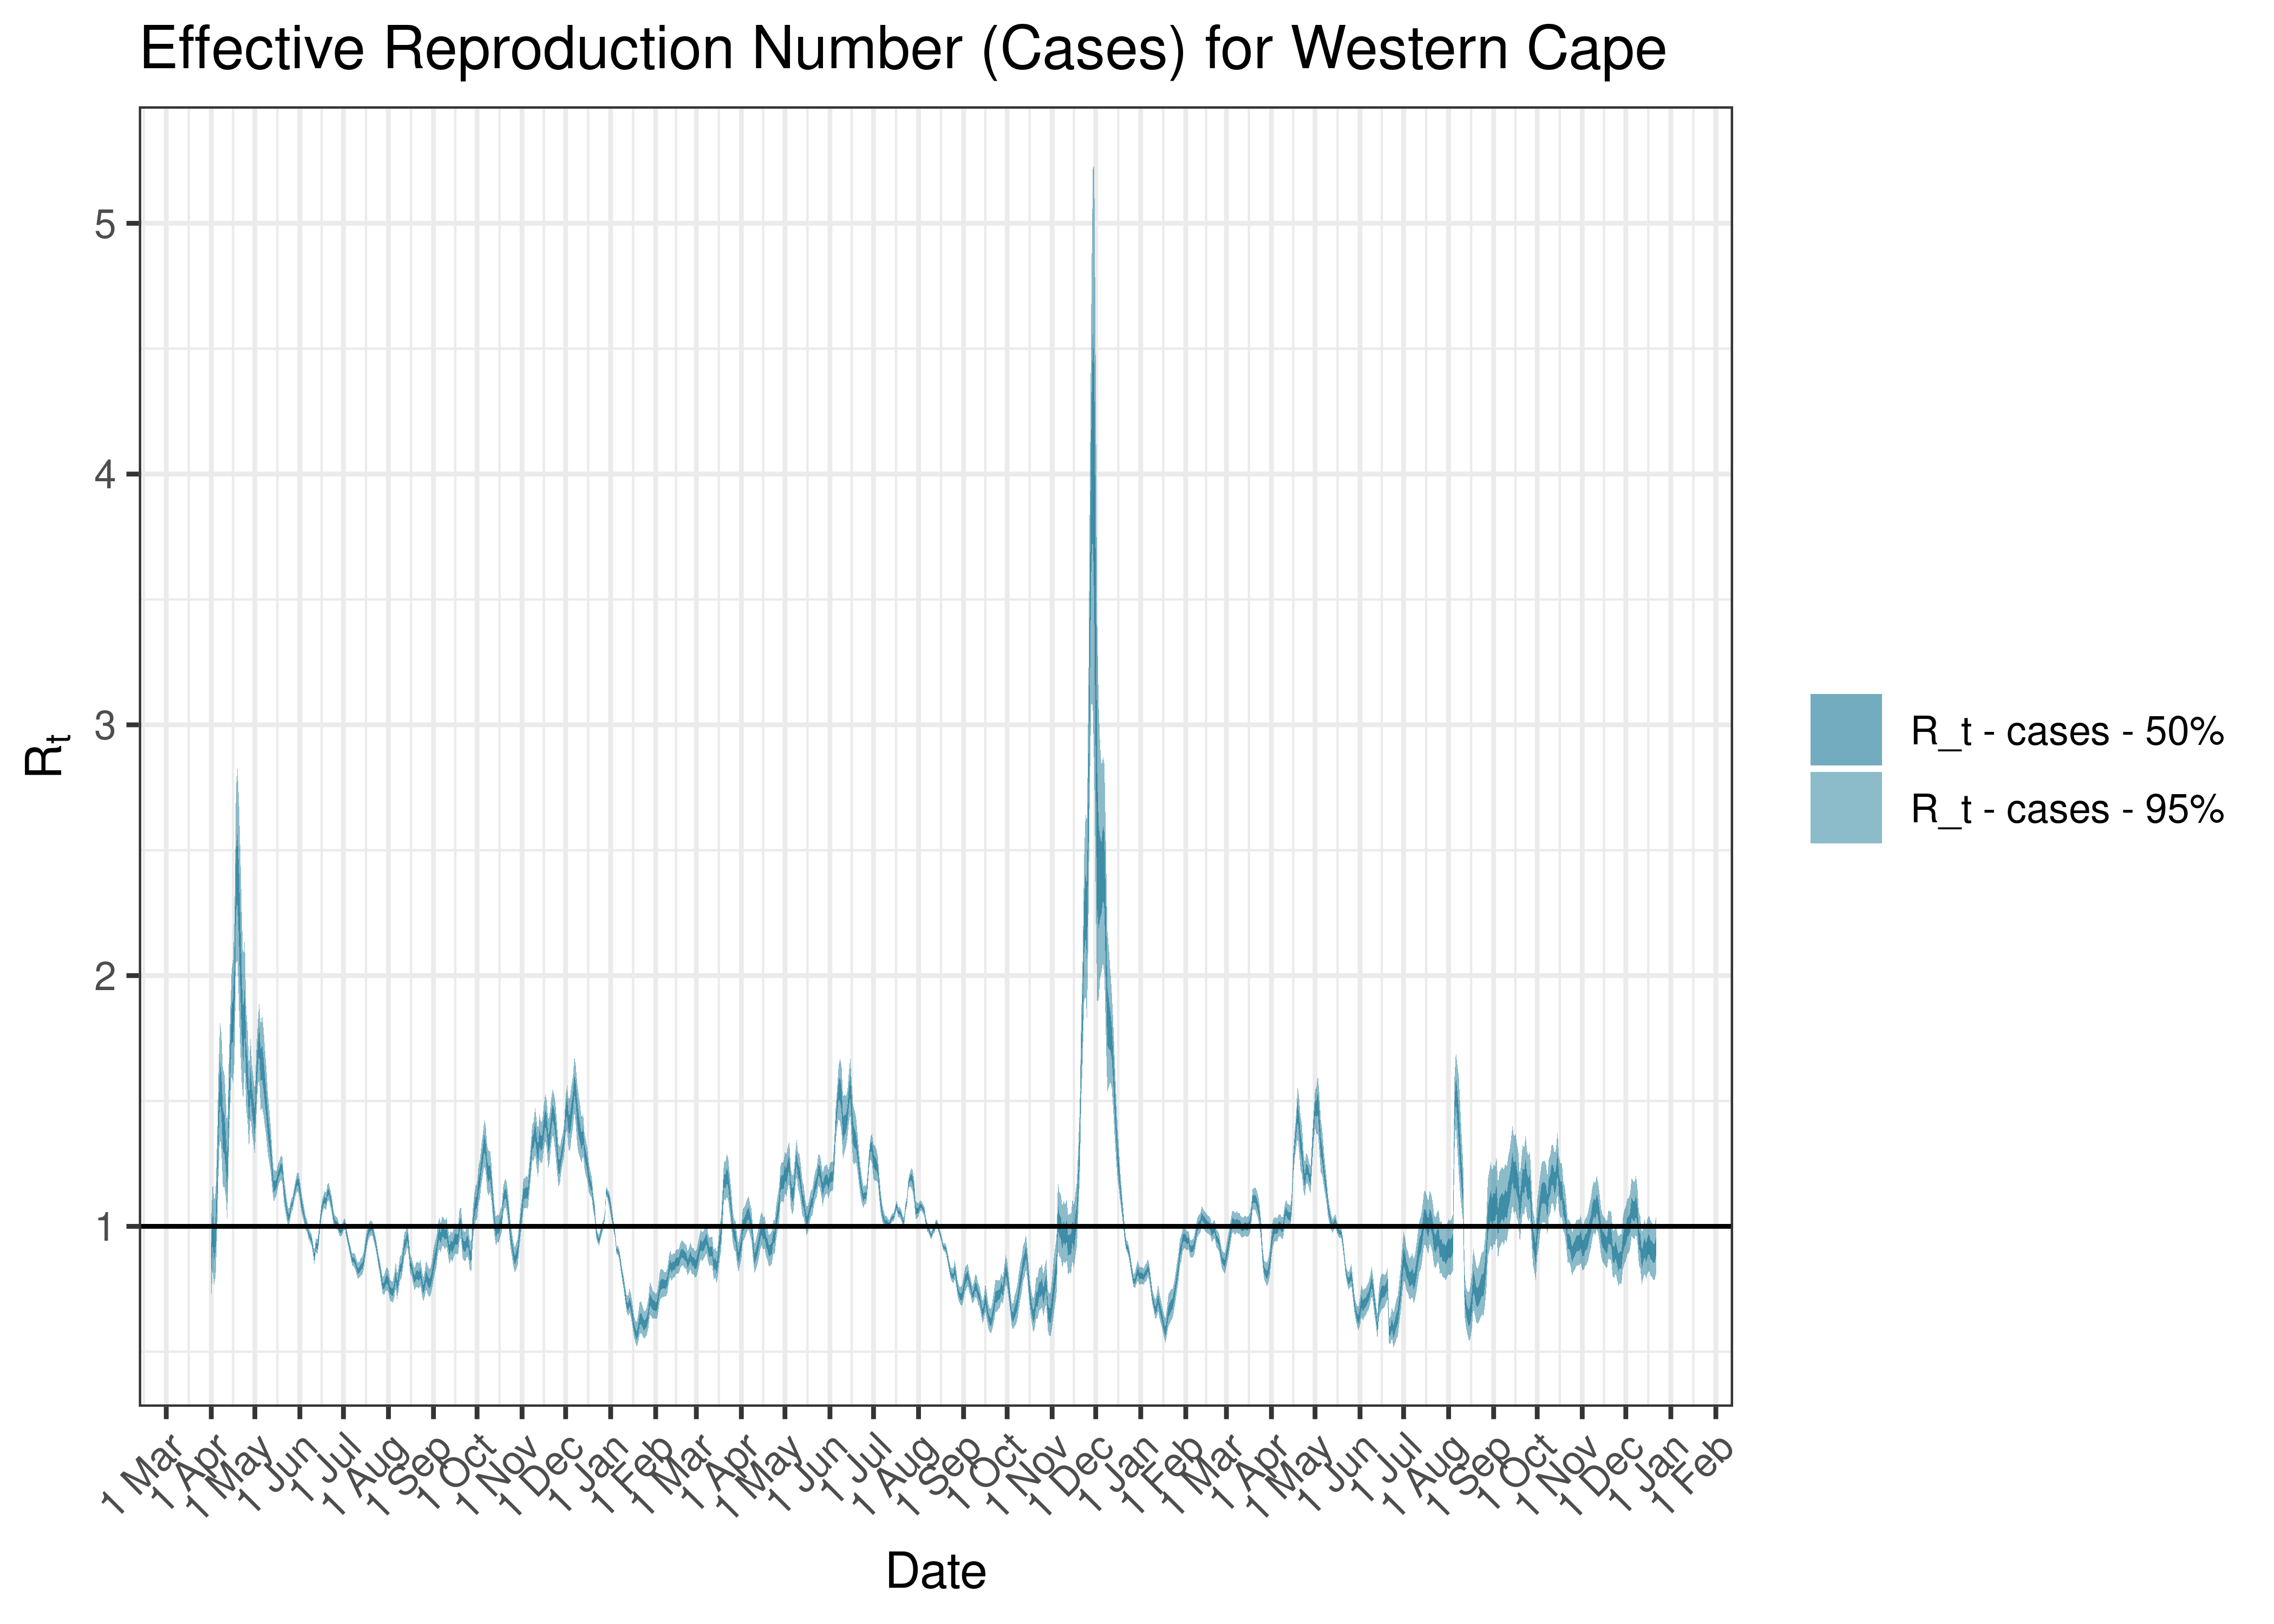 Estimated Effective Reproduction Number Based on Cases for Western Cape since 1 April 2020